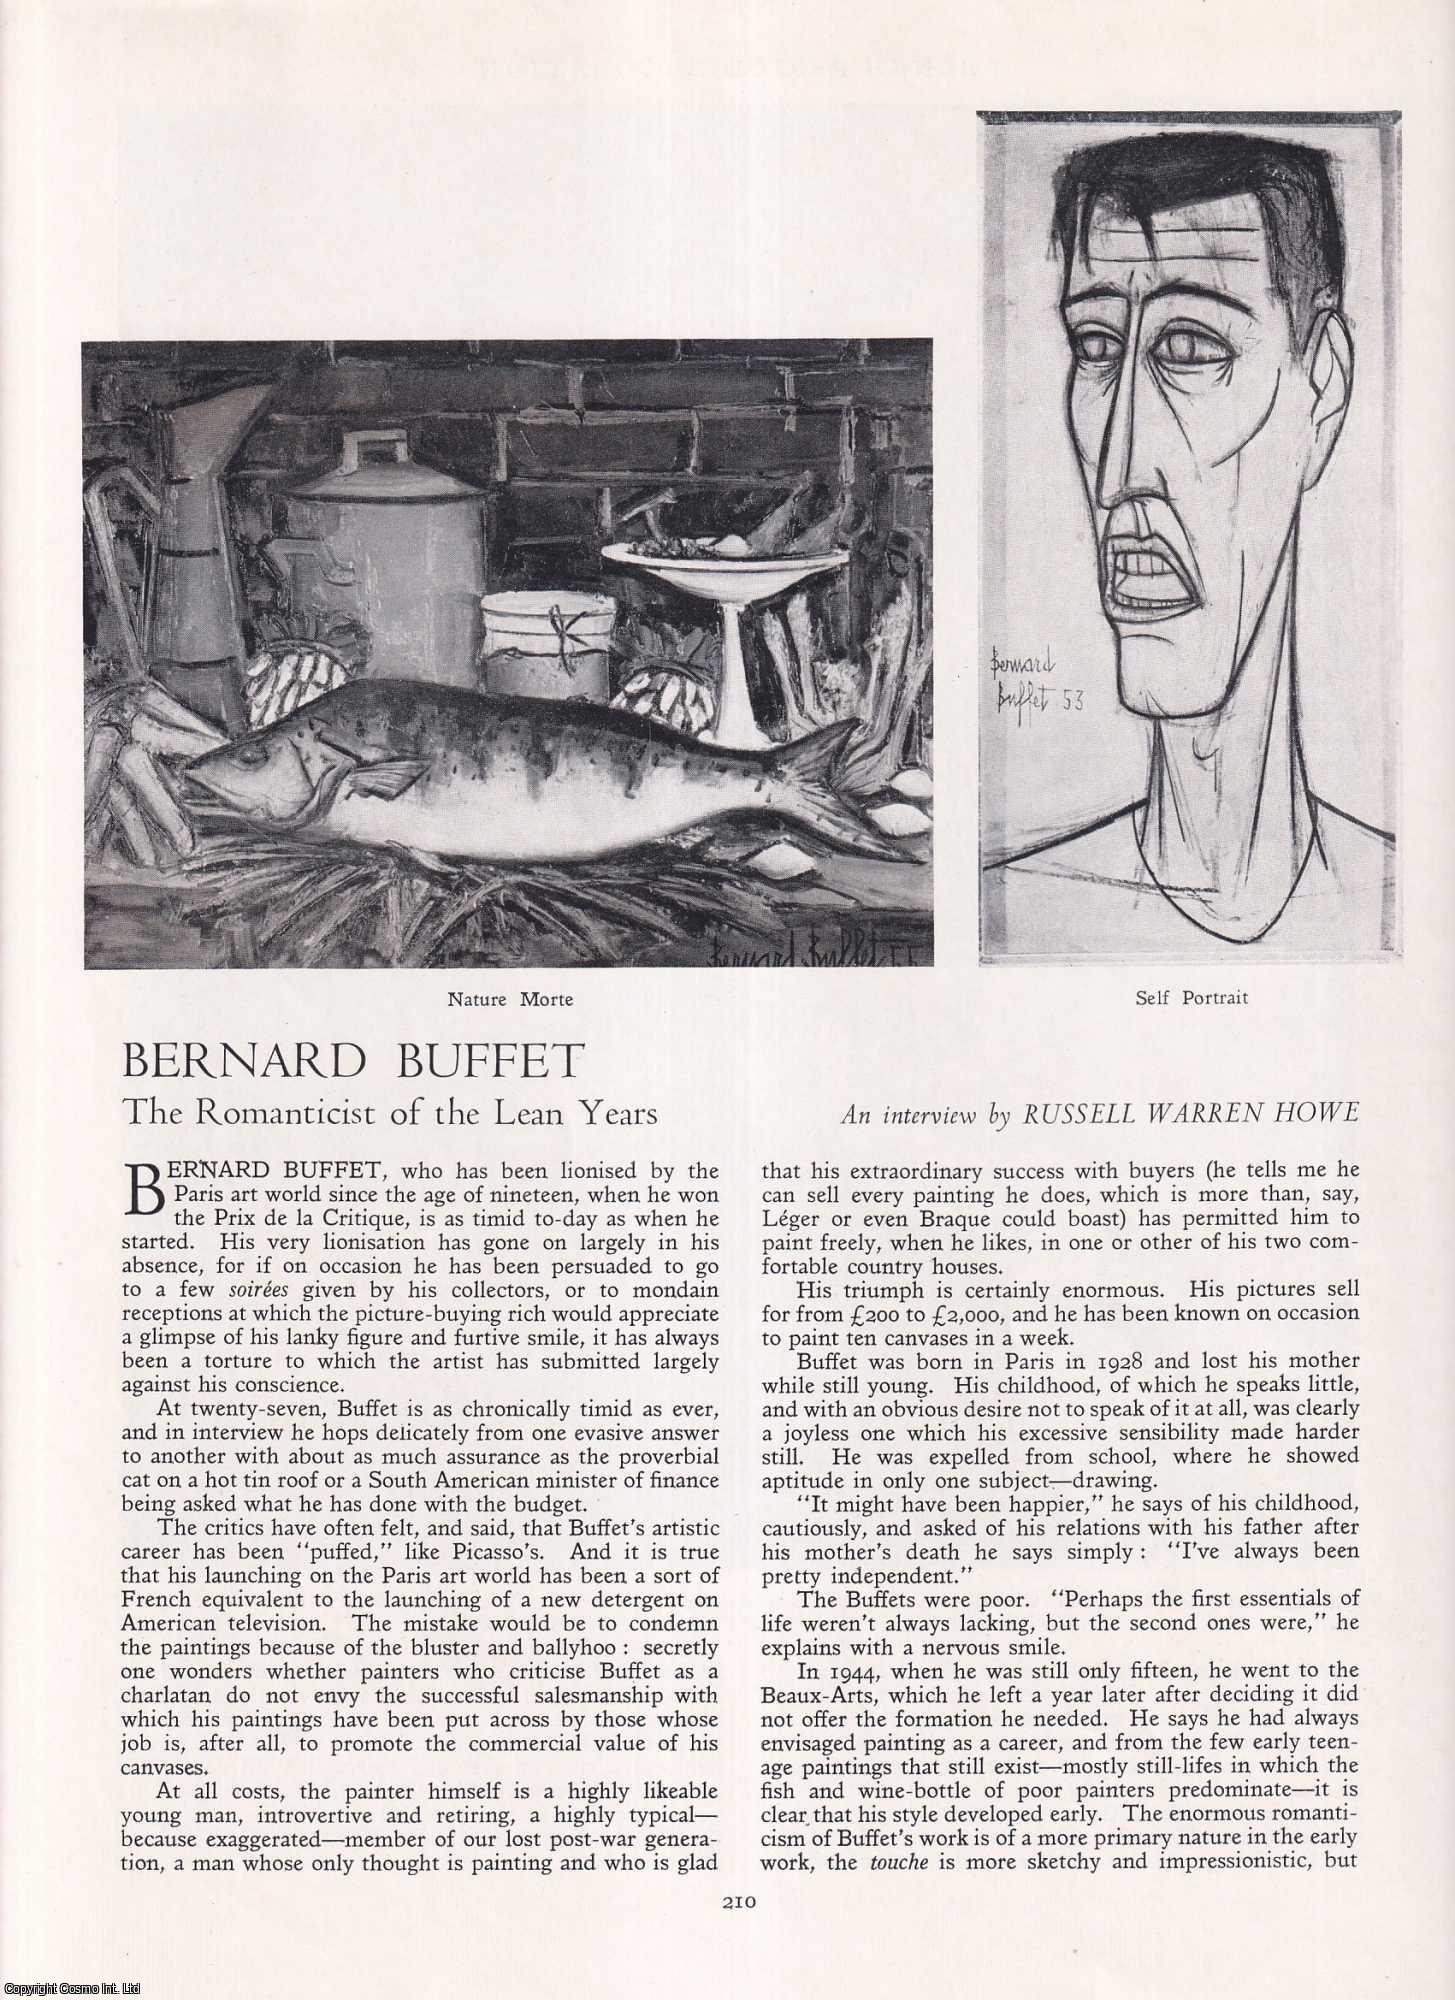 Russell Warren Howe - Bernard Buffet, Controversial French Painter: The Romanticist of the Lean Years. An original article from Apollo, International Magazine of the Arts, 1955.